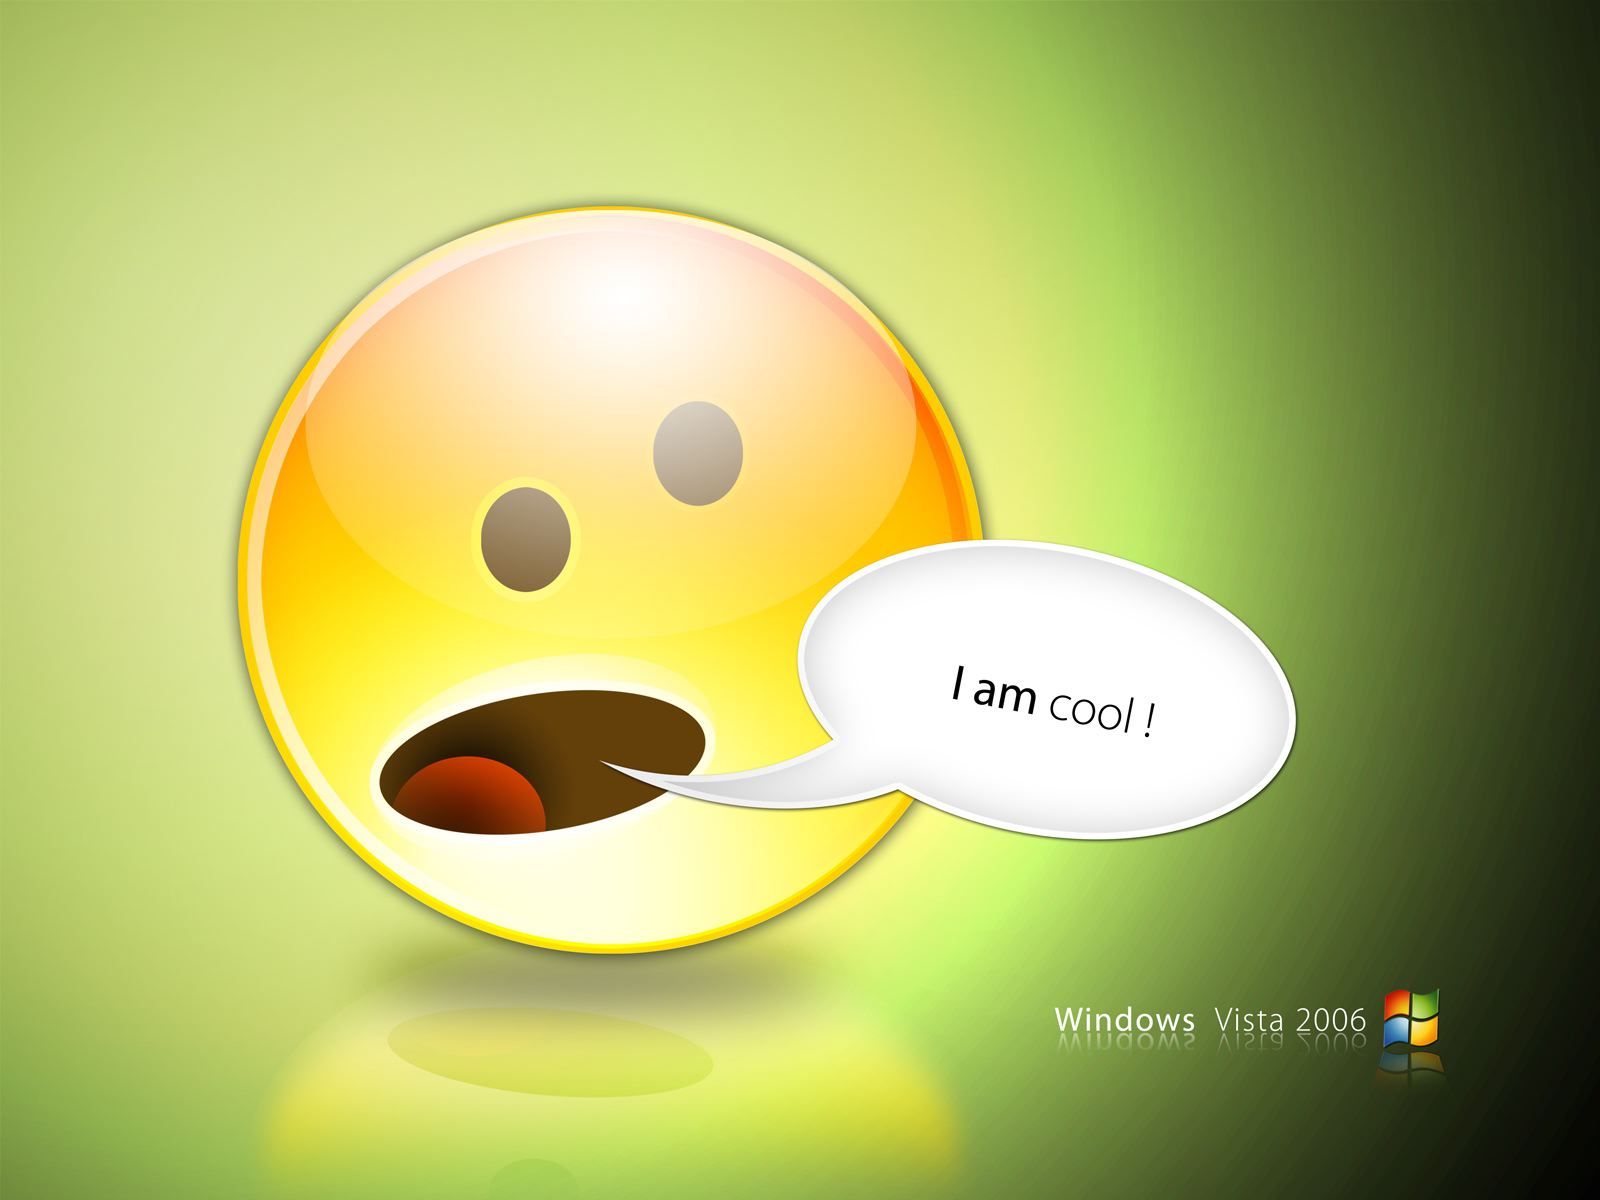 Wallpapers Photos Images Funny Smiley Face Pictures